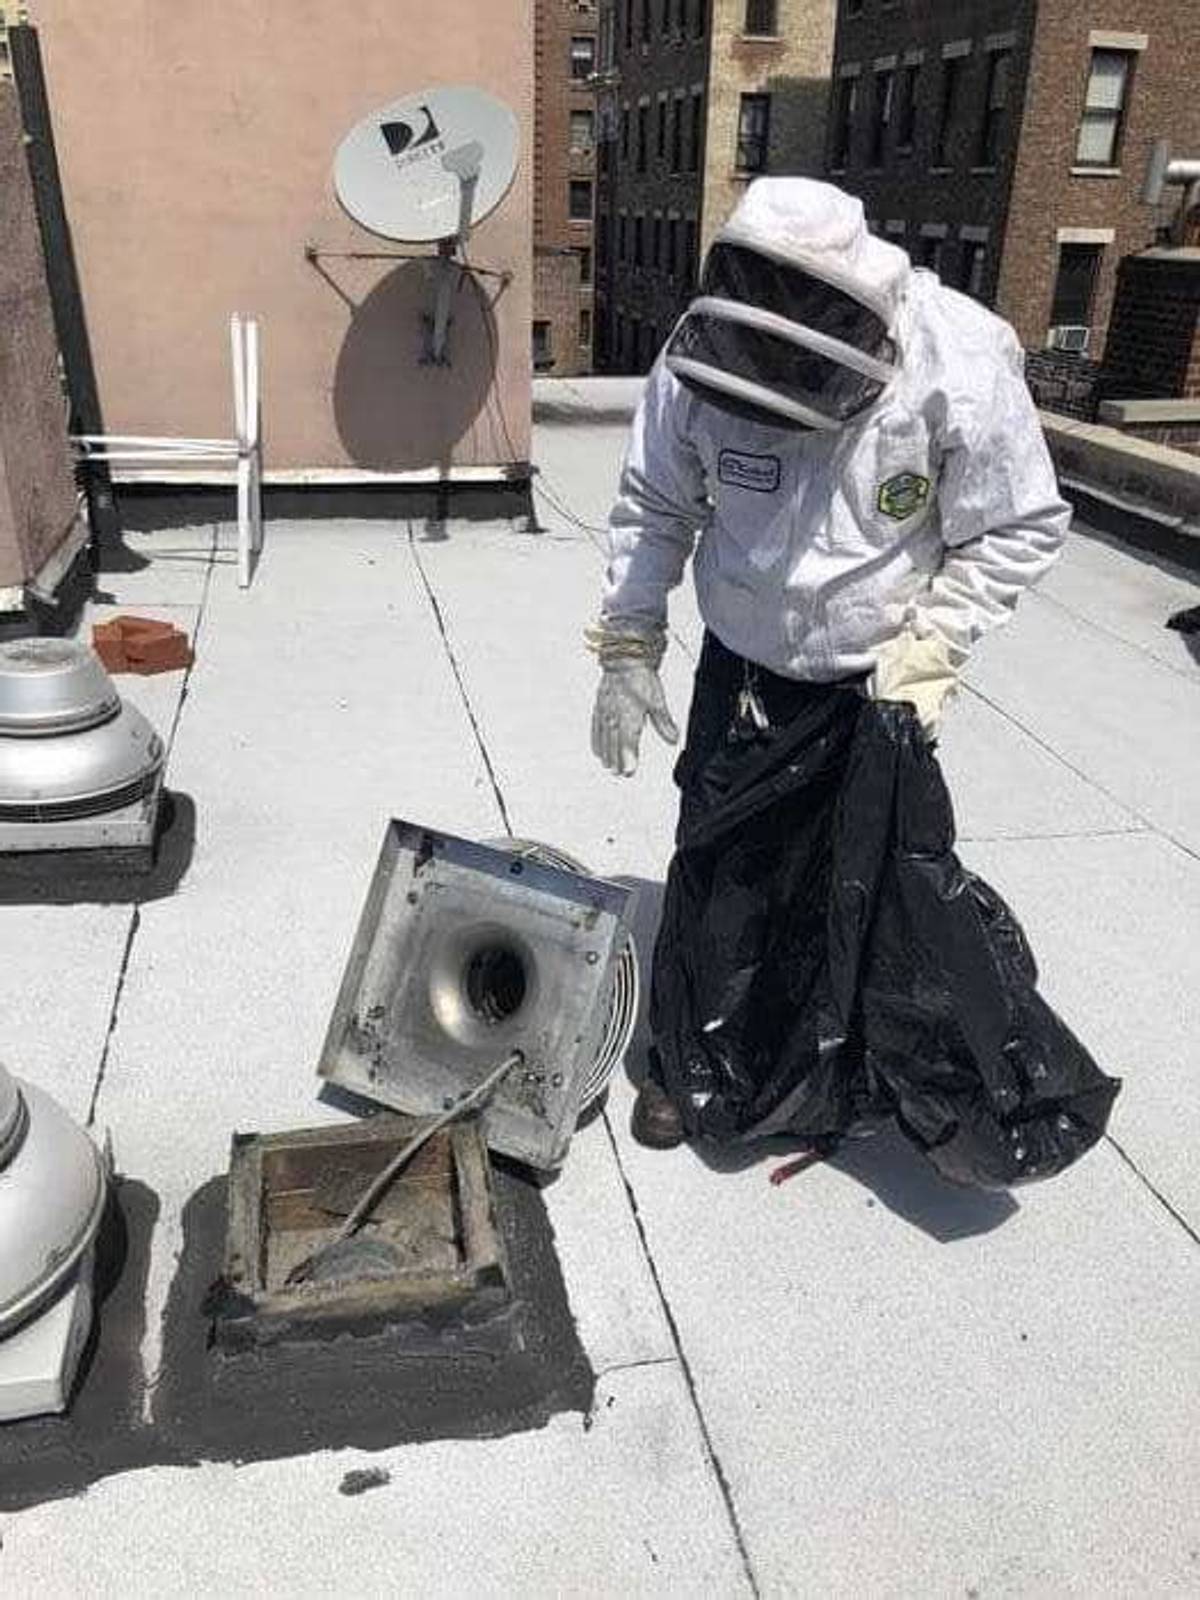 commercial bees nest removal and treatment in nyc